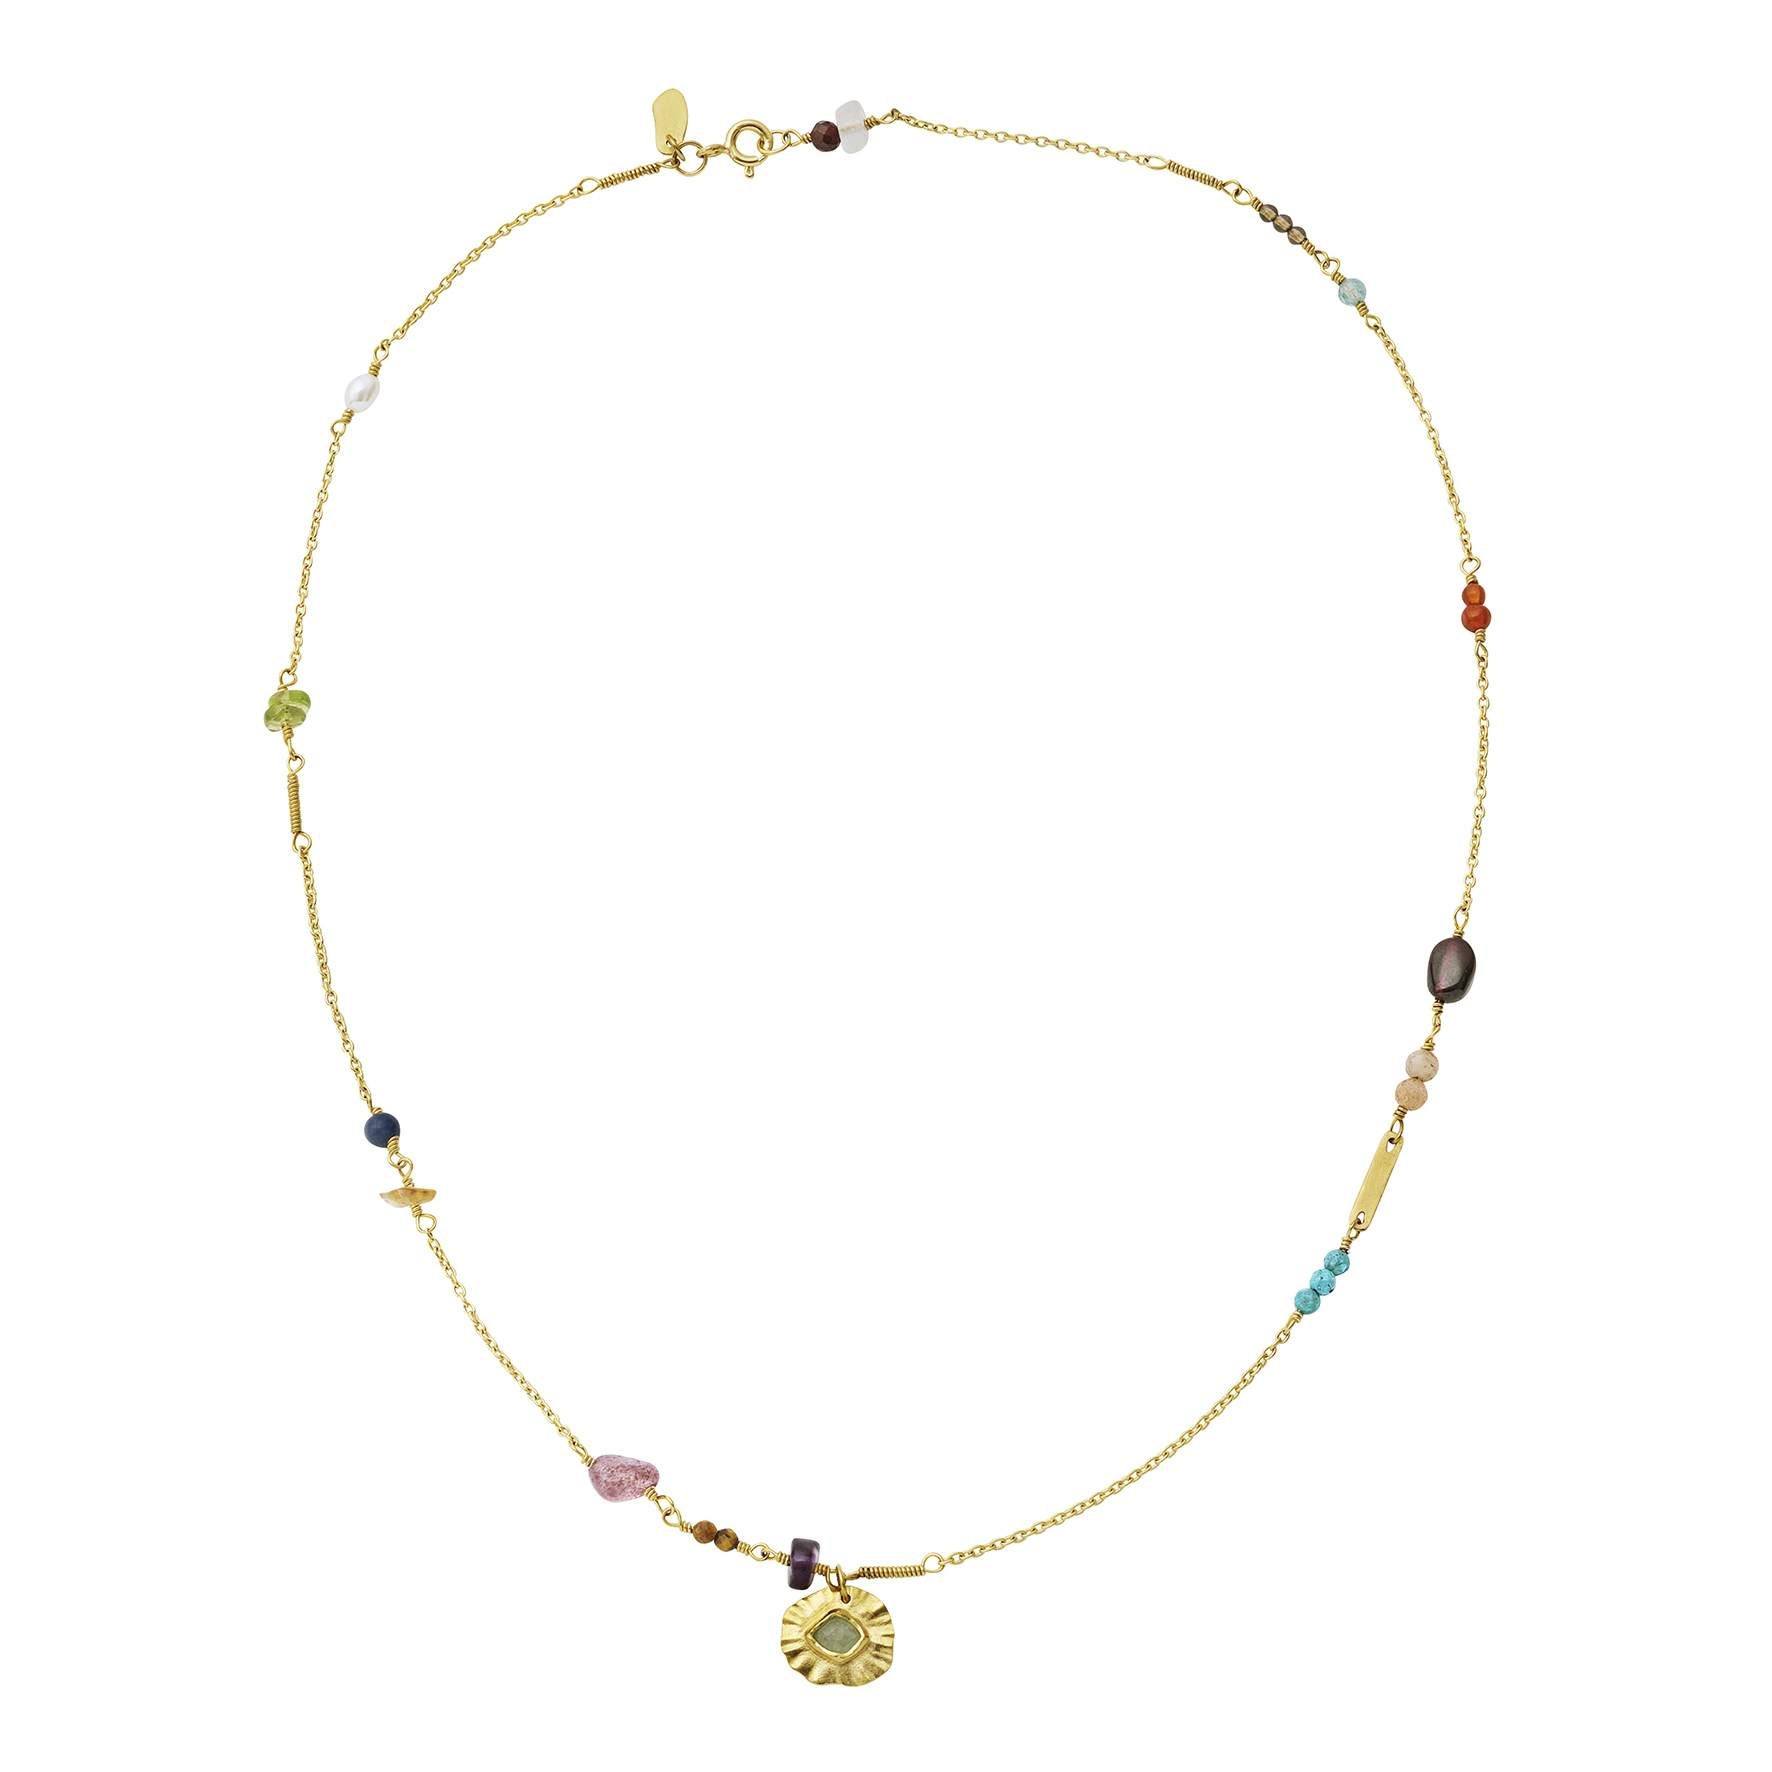 Carma Necklace from Maanesten in Goldplated-Silver Sterling 925